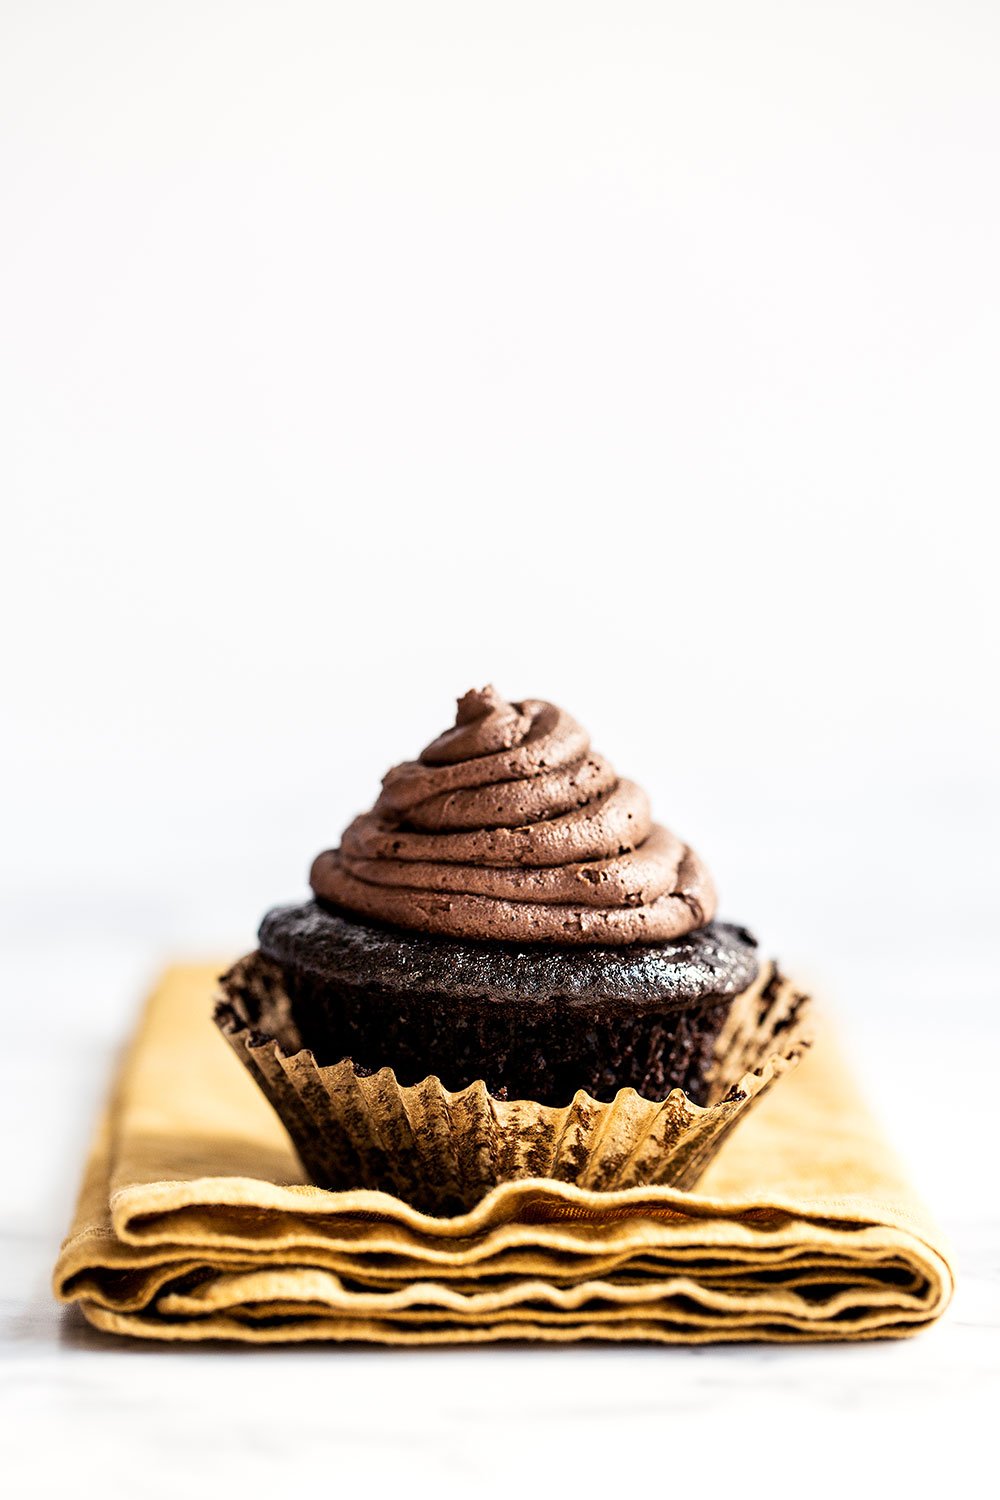 Chocolate Blackout Cupcakes feature a dark chocolate cupcake filled with chocolate ganache and topped with a rich dark chocolate buttercream. For serious chocolate lovers only!!